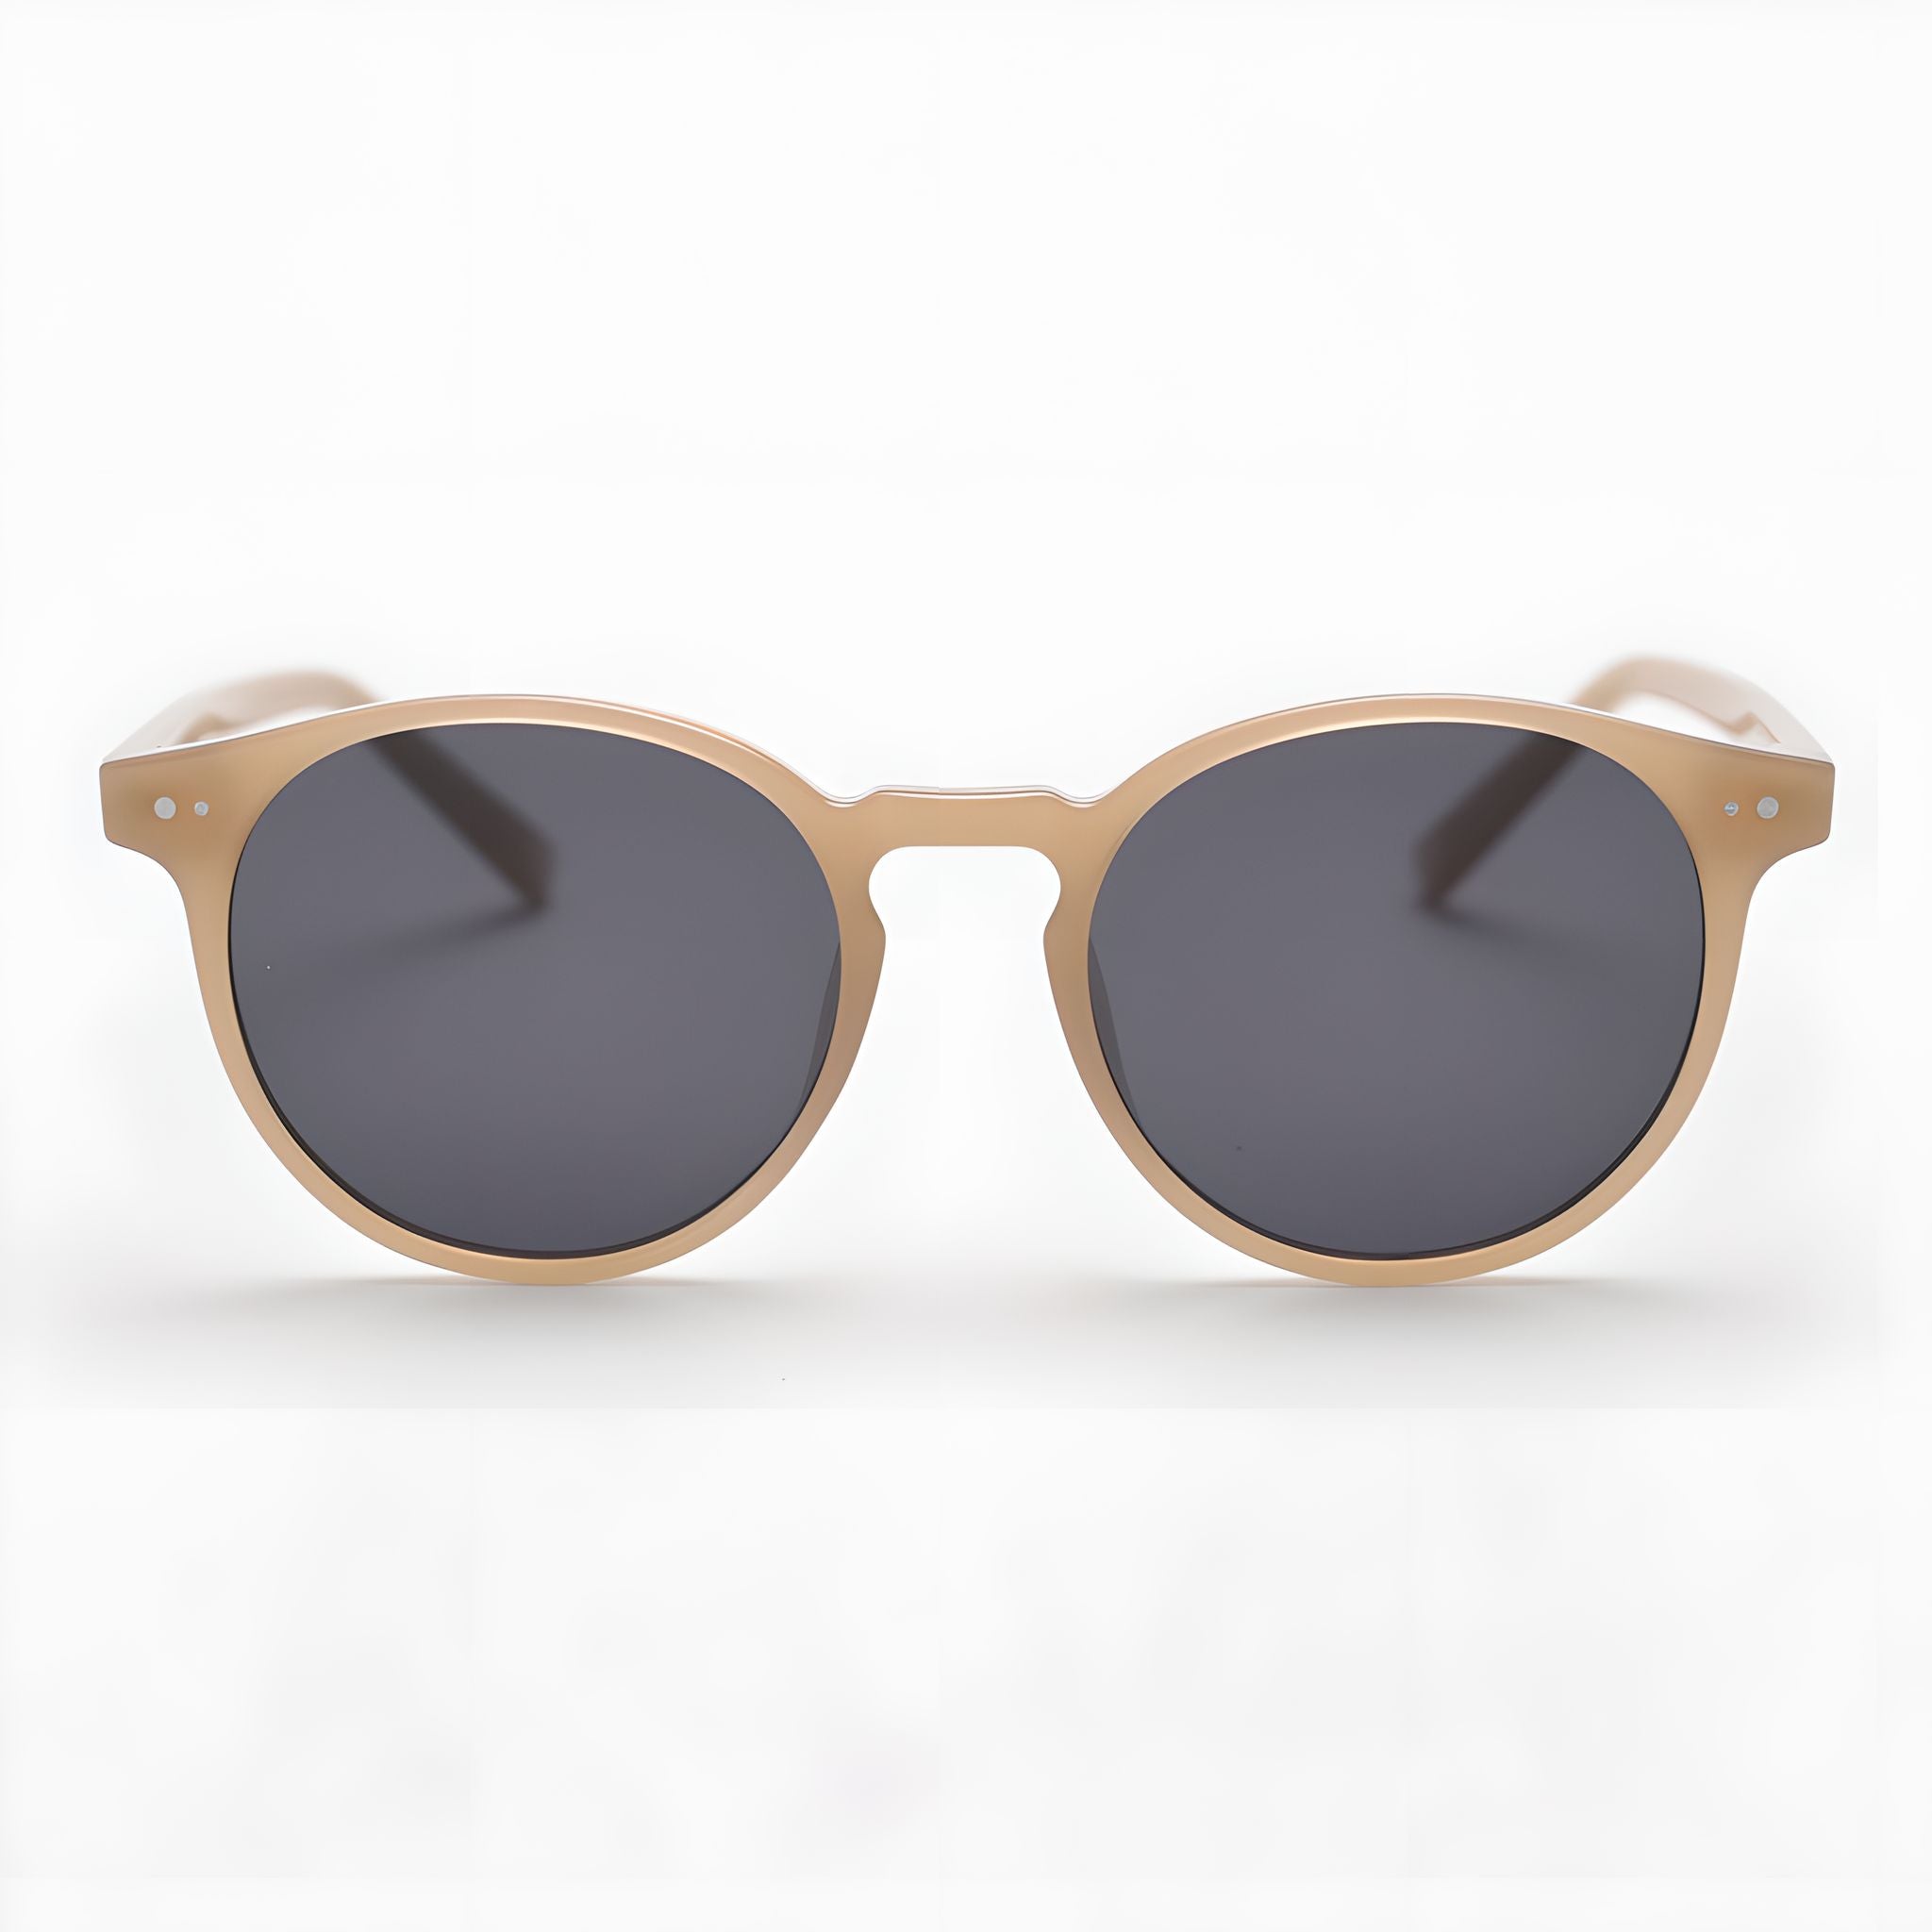 Buy Round Shape Sunglasses Online In India At Best Offers | Tata CLiQ